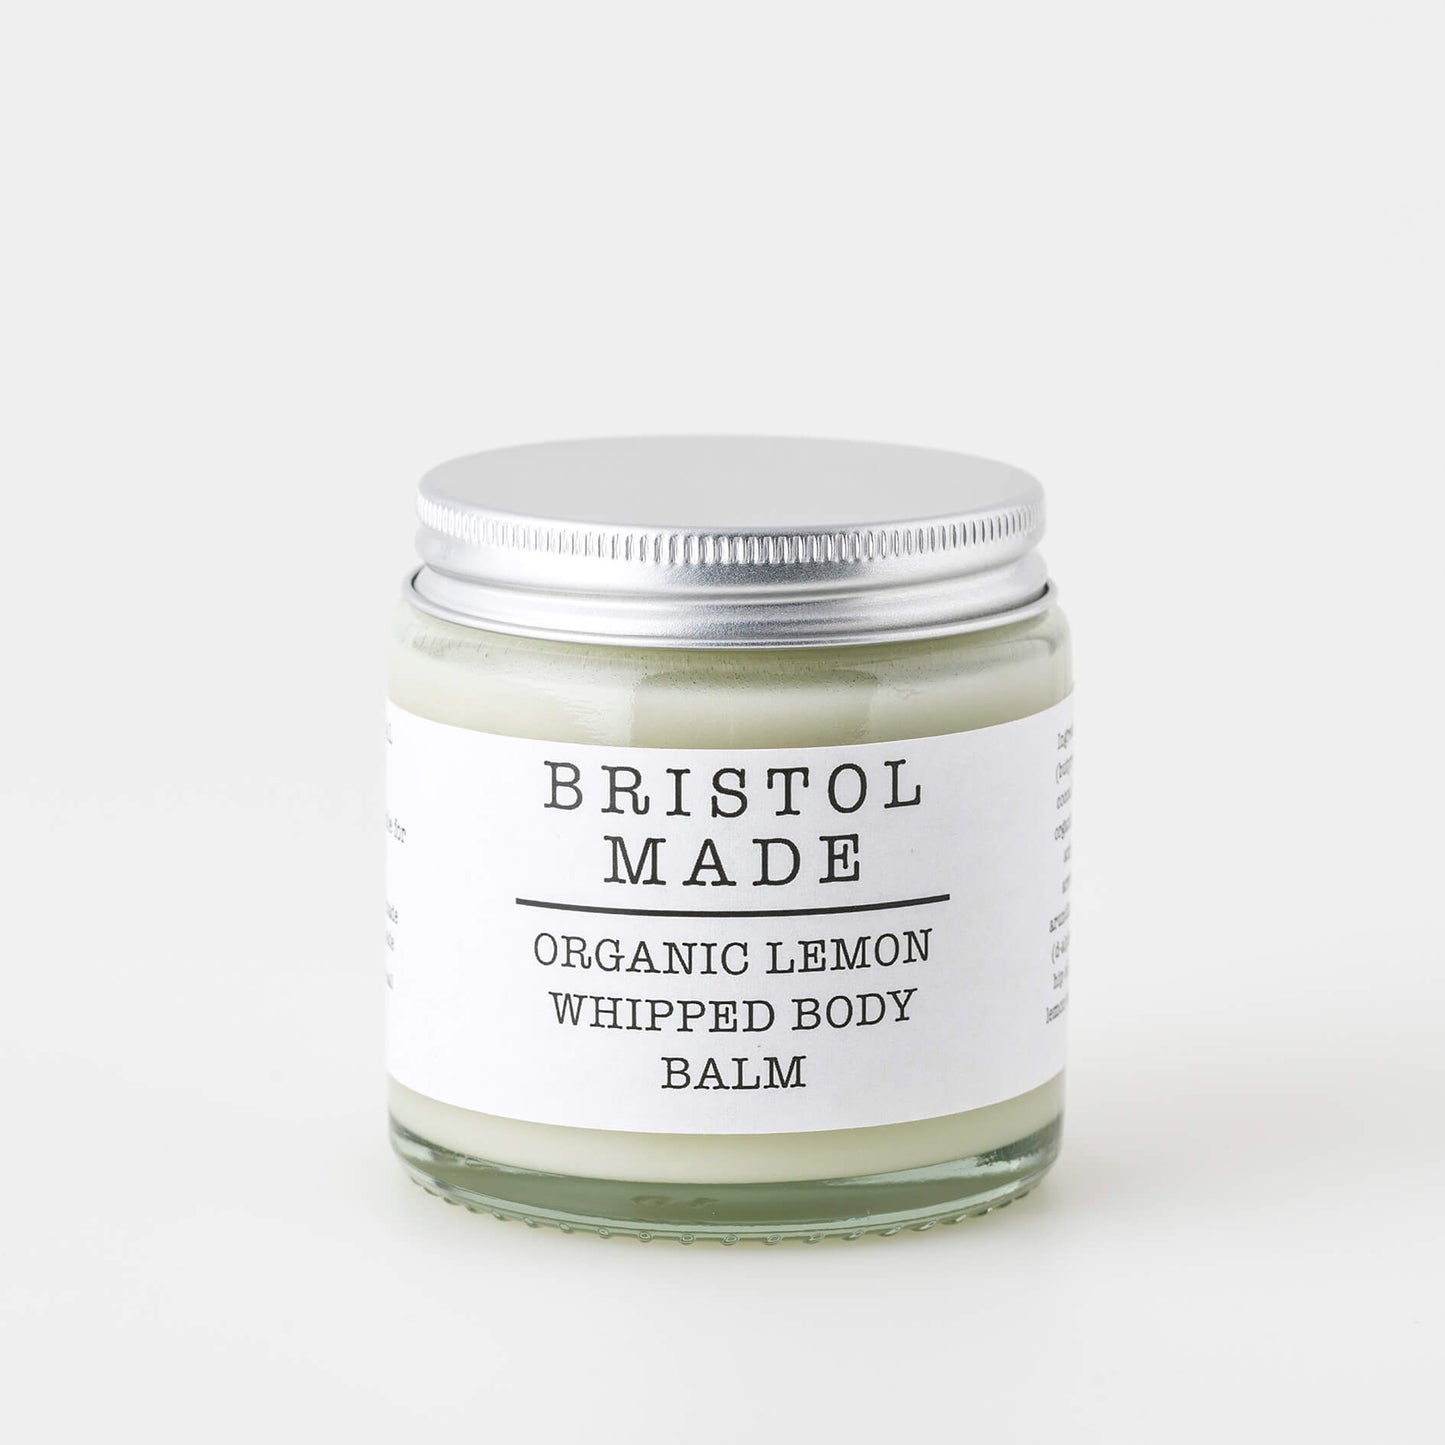 image of a Bristolmade body balm, showing the cream coloured product, in a sustainable 120ml clear glass jar. With a white label and black text, clearly showing the vegan ingredients and how to use the product.